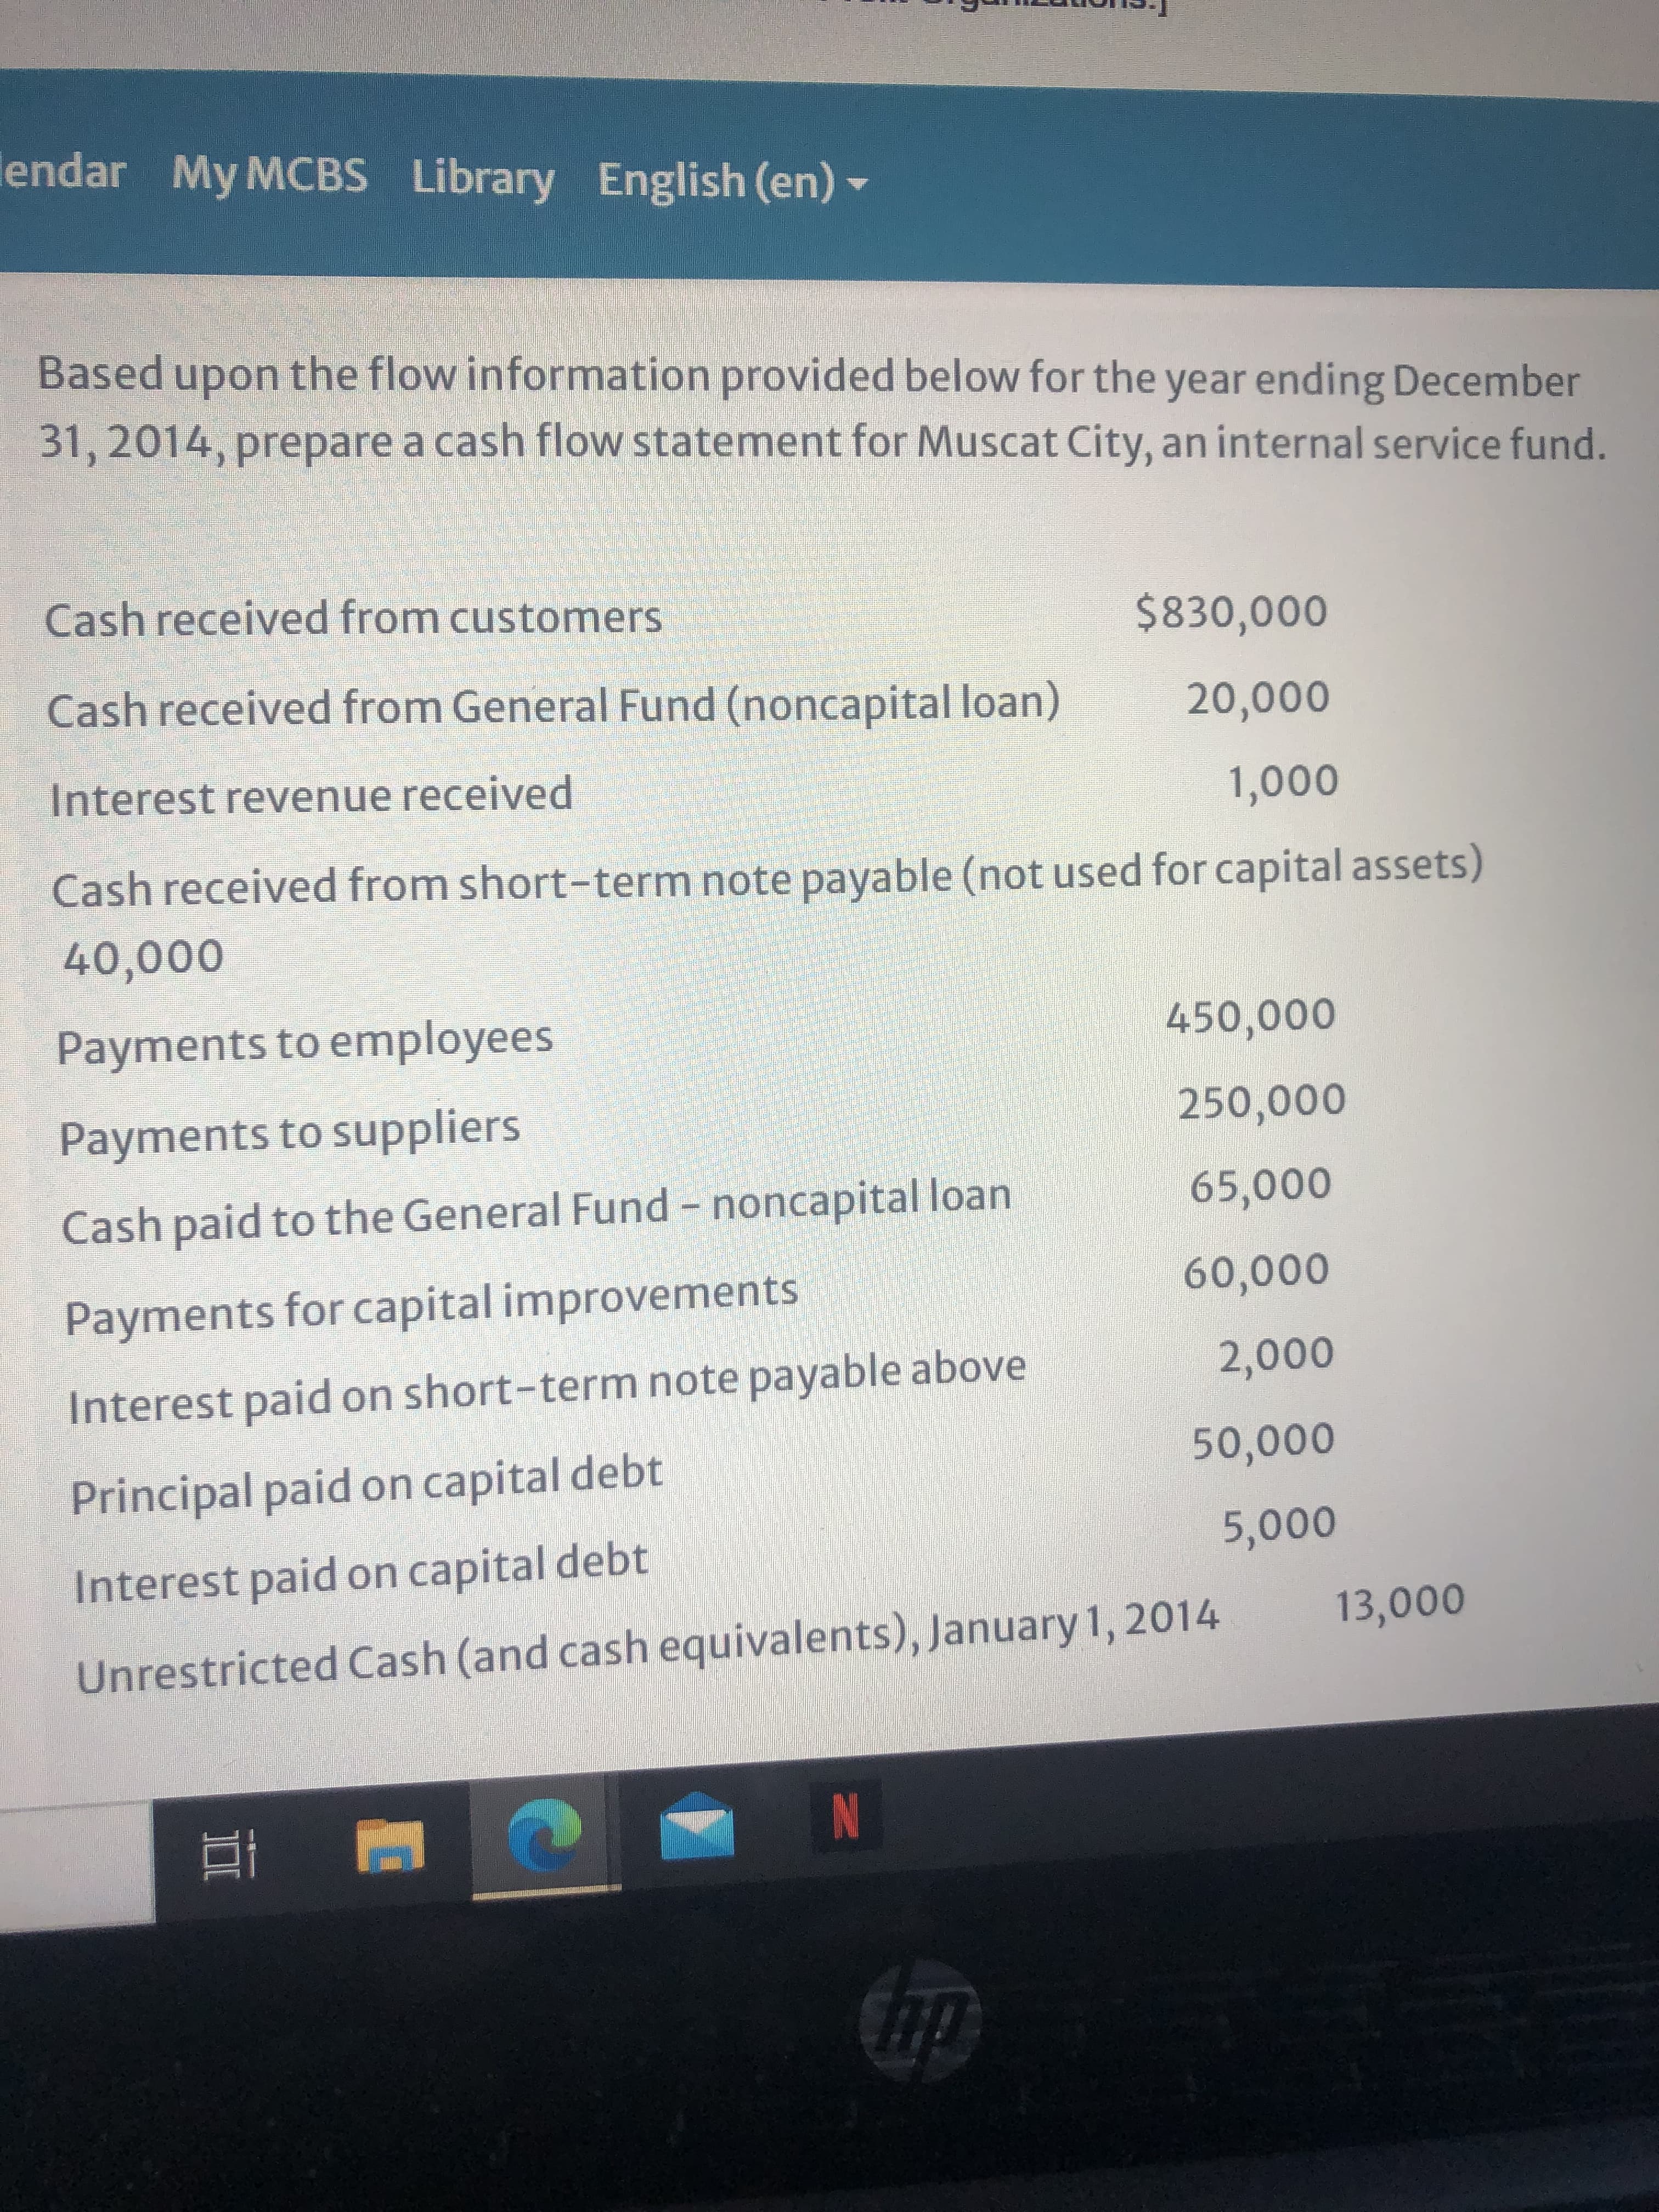 Based upon the flow information provided below for the year ending December
31, 2014, prepare a cash flow statement for Muscat City, an internal service fund
